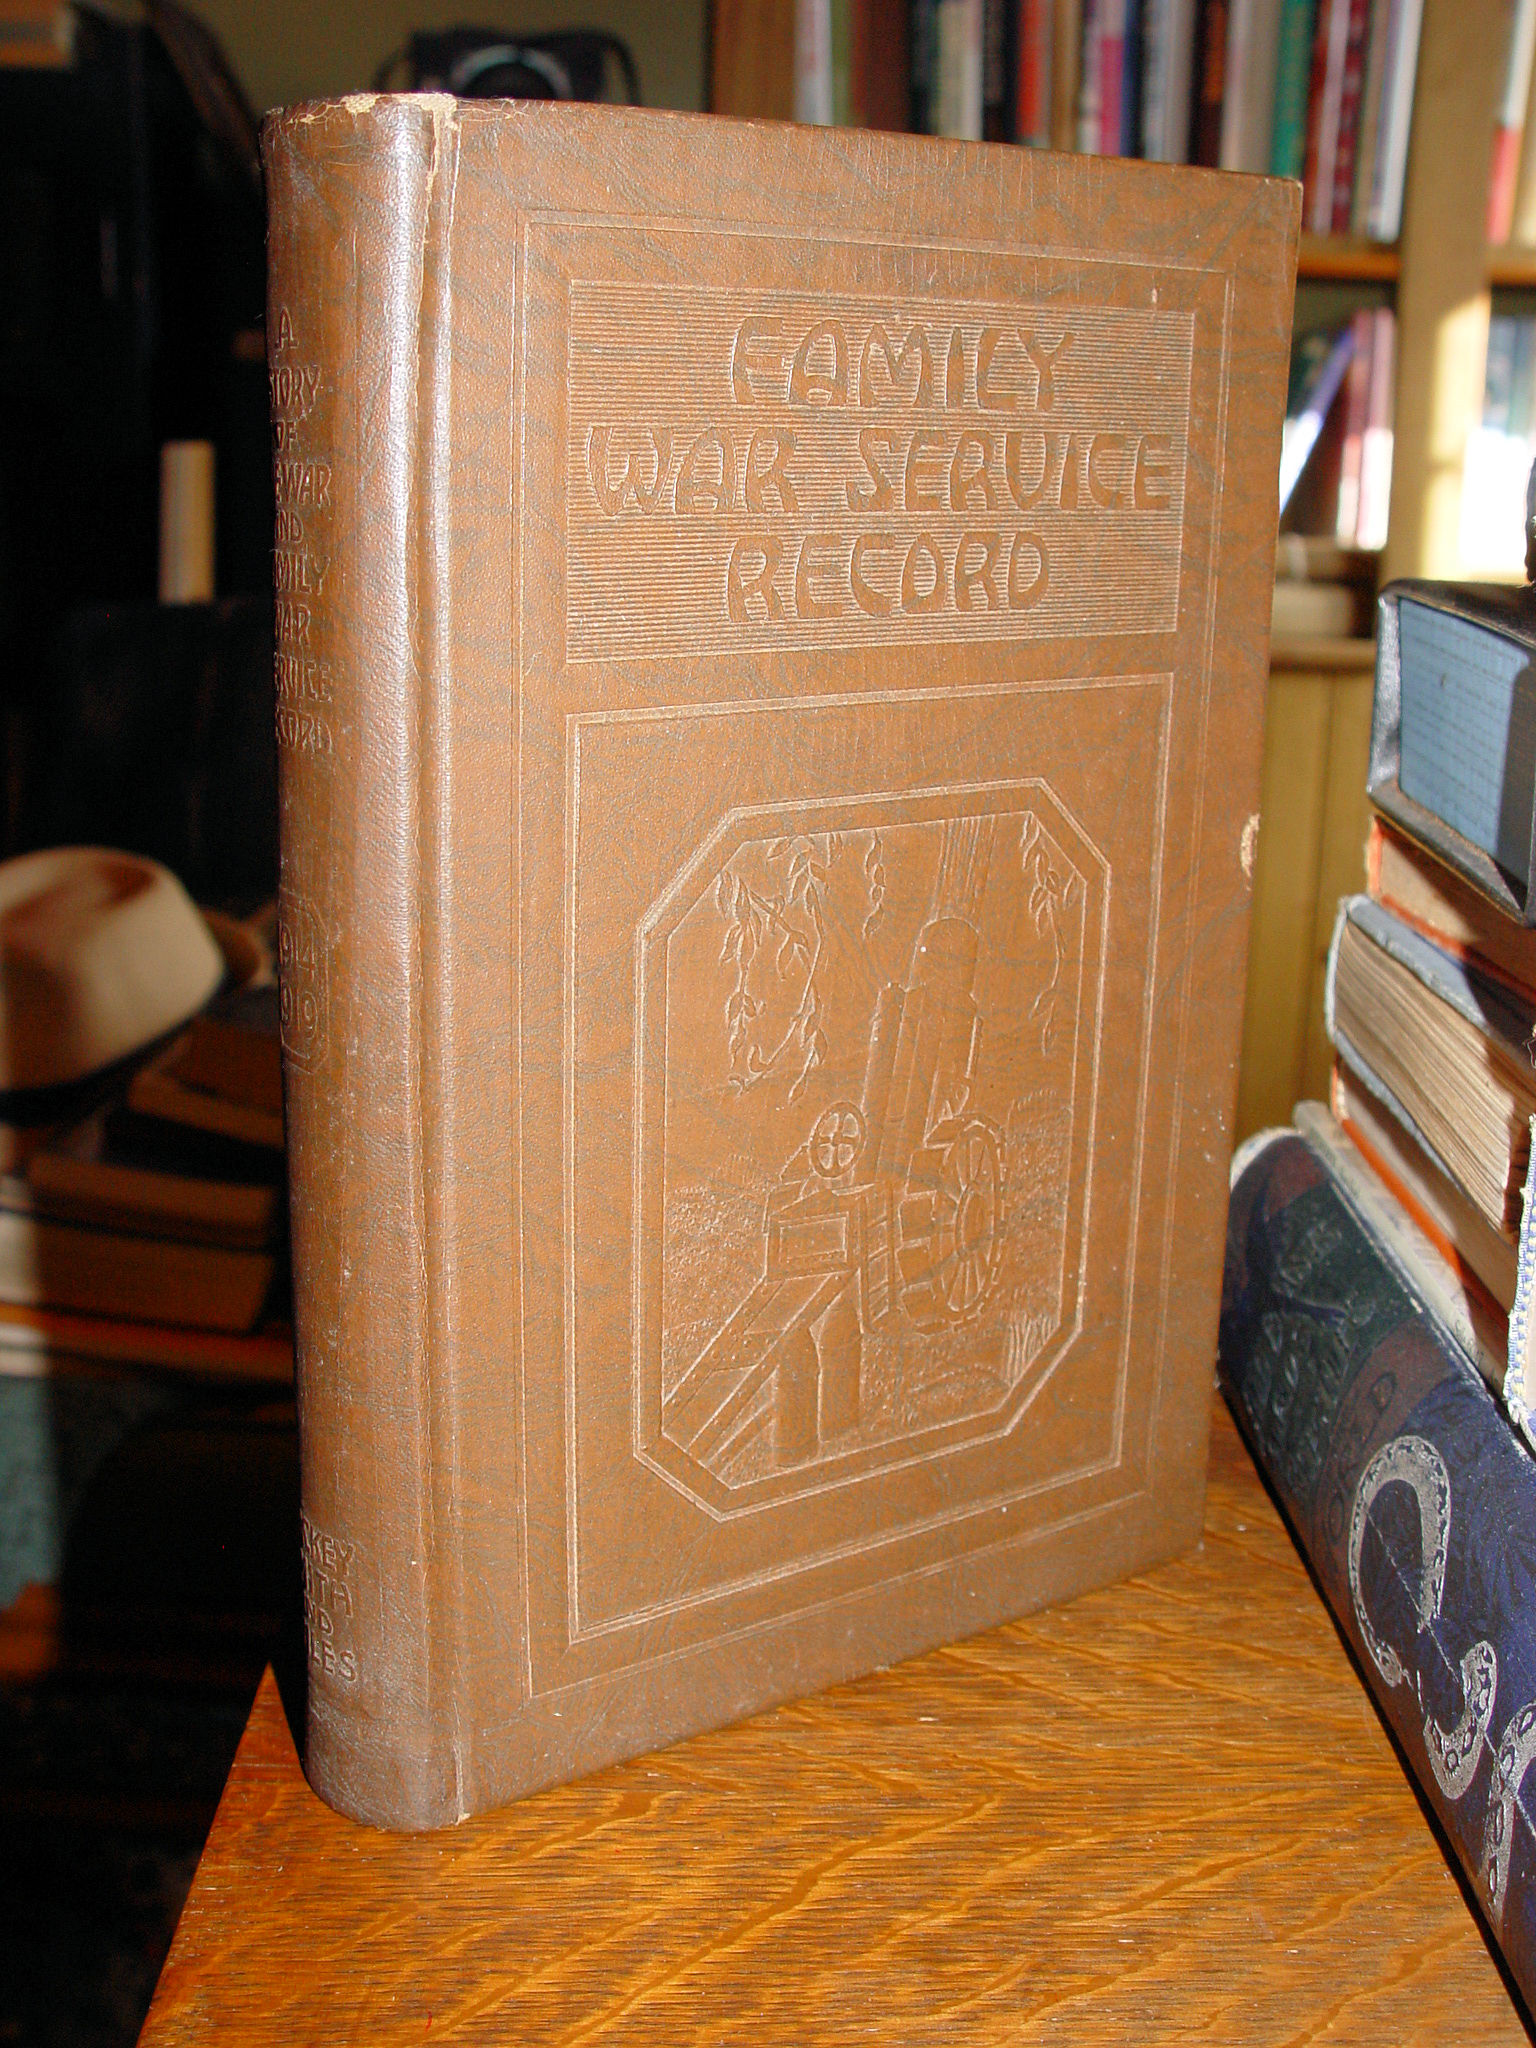 A story of the
                        war and family war service record, 1914-1919